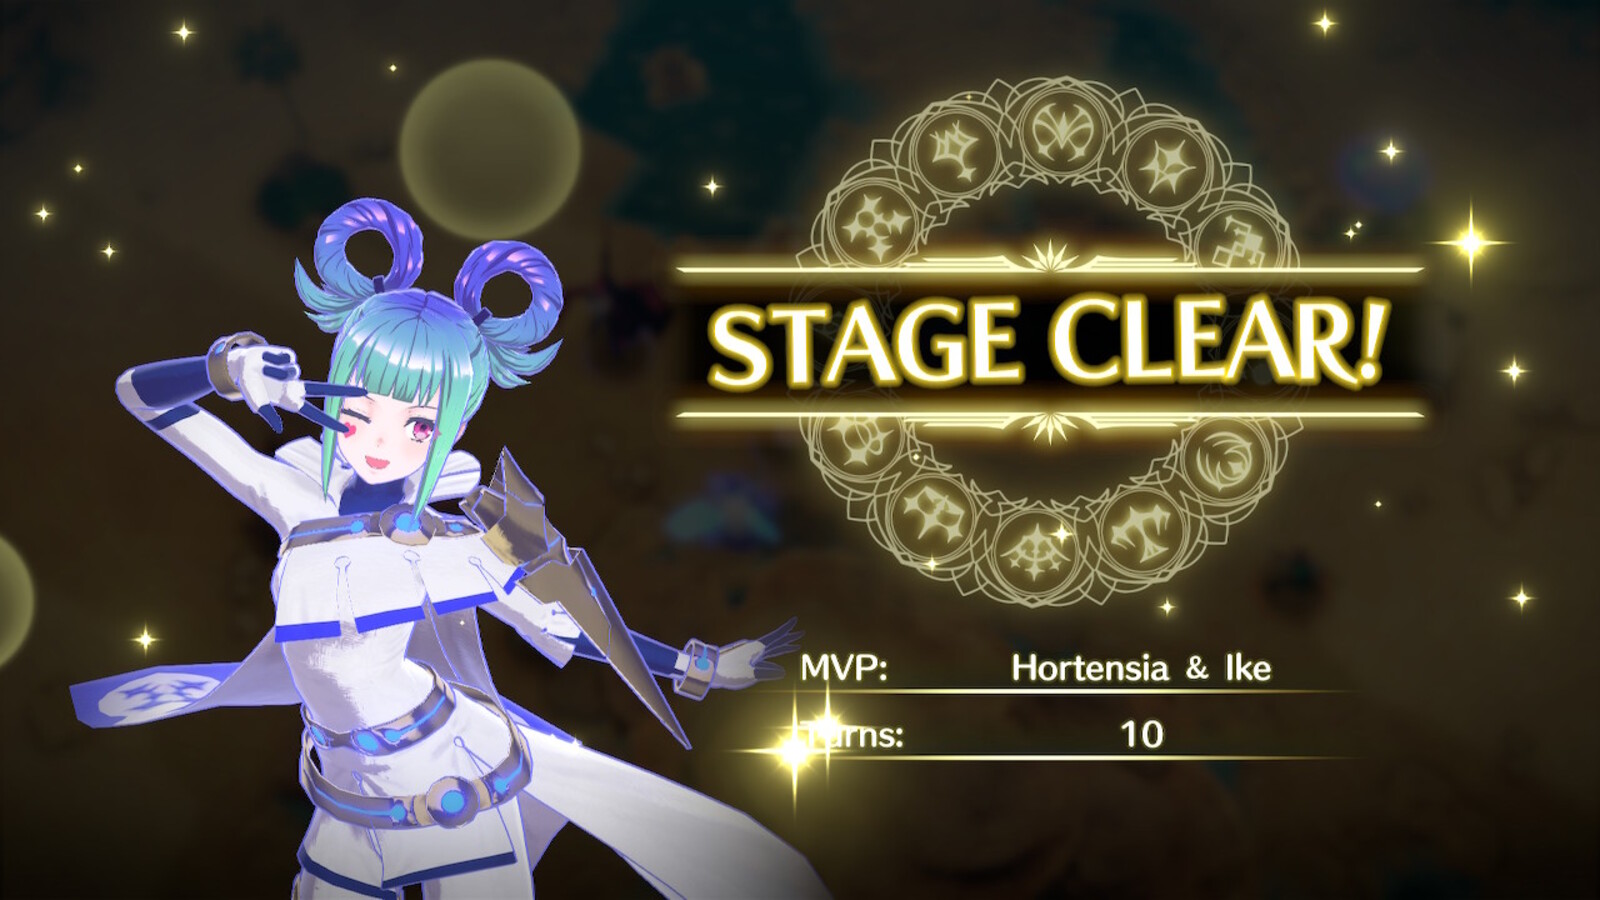 Stage Cleared with Engaged Hortensia as MVP